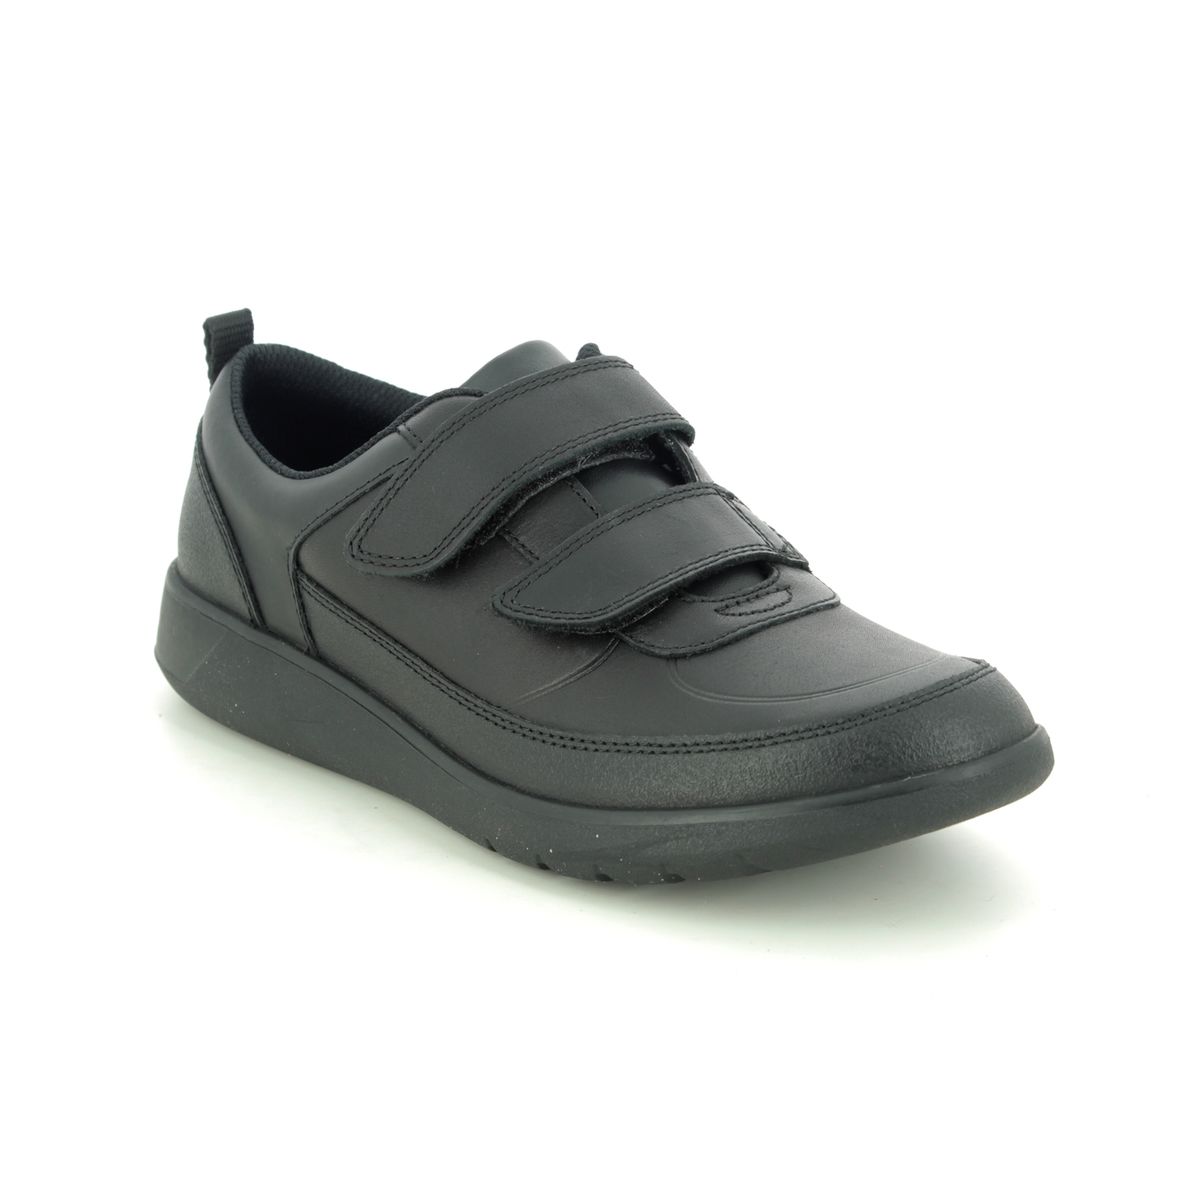 Clarks Scape Flare Y Black Leather Kids Boys Shoes 494097G In Size 5 In Plain Black Leather G Width Fitting For School For kids